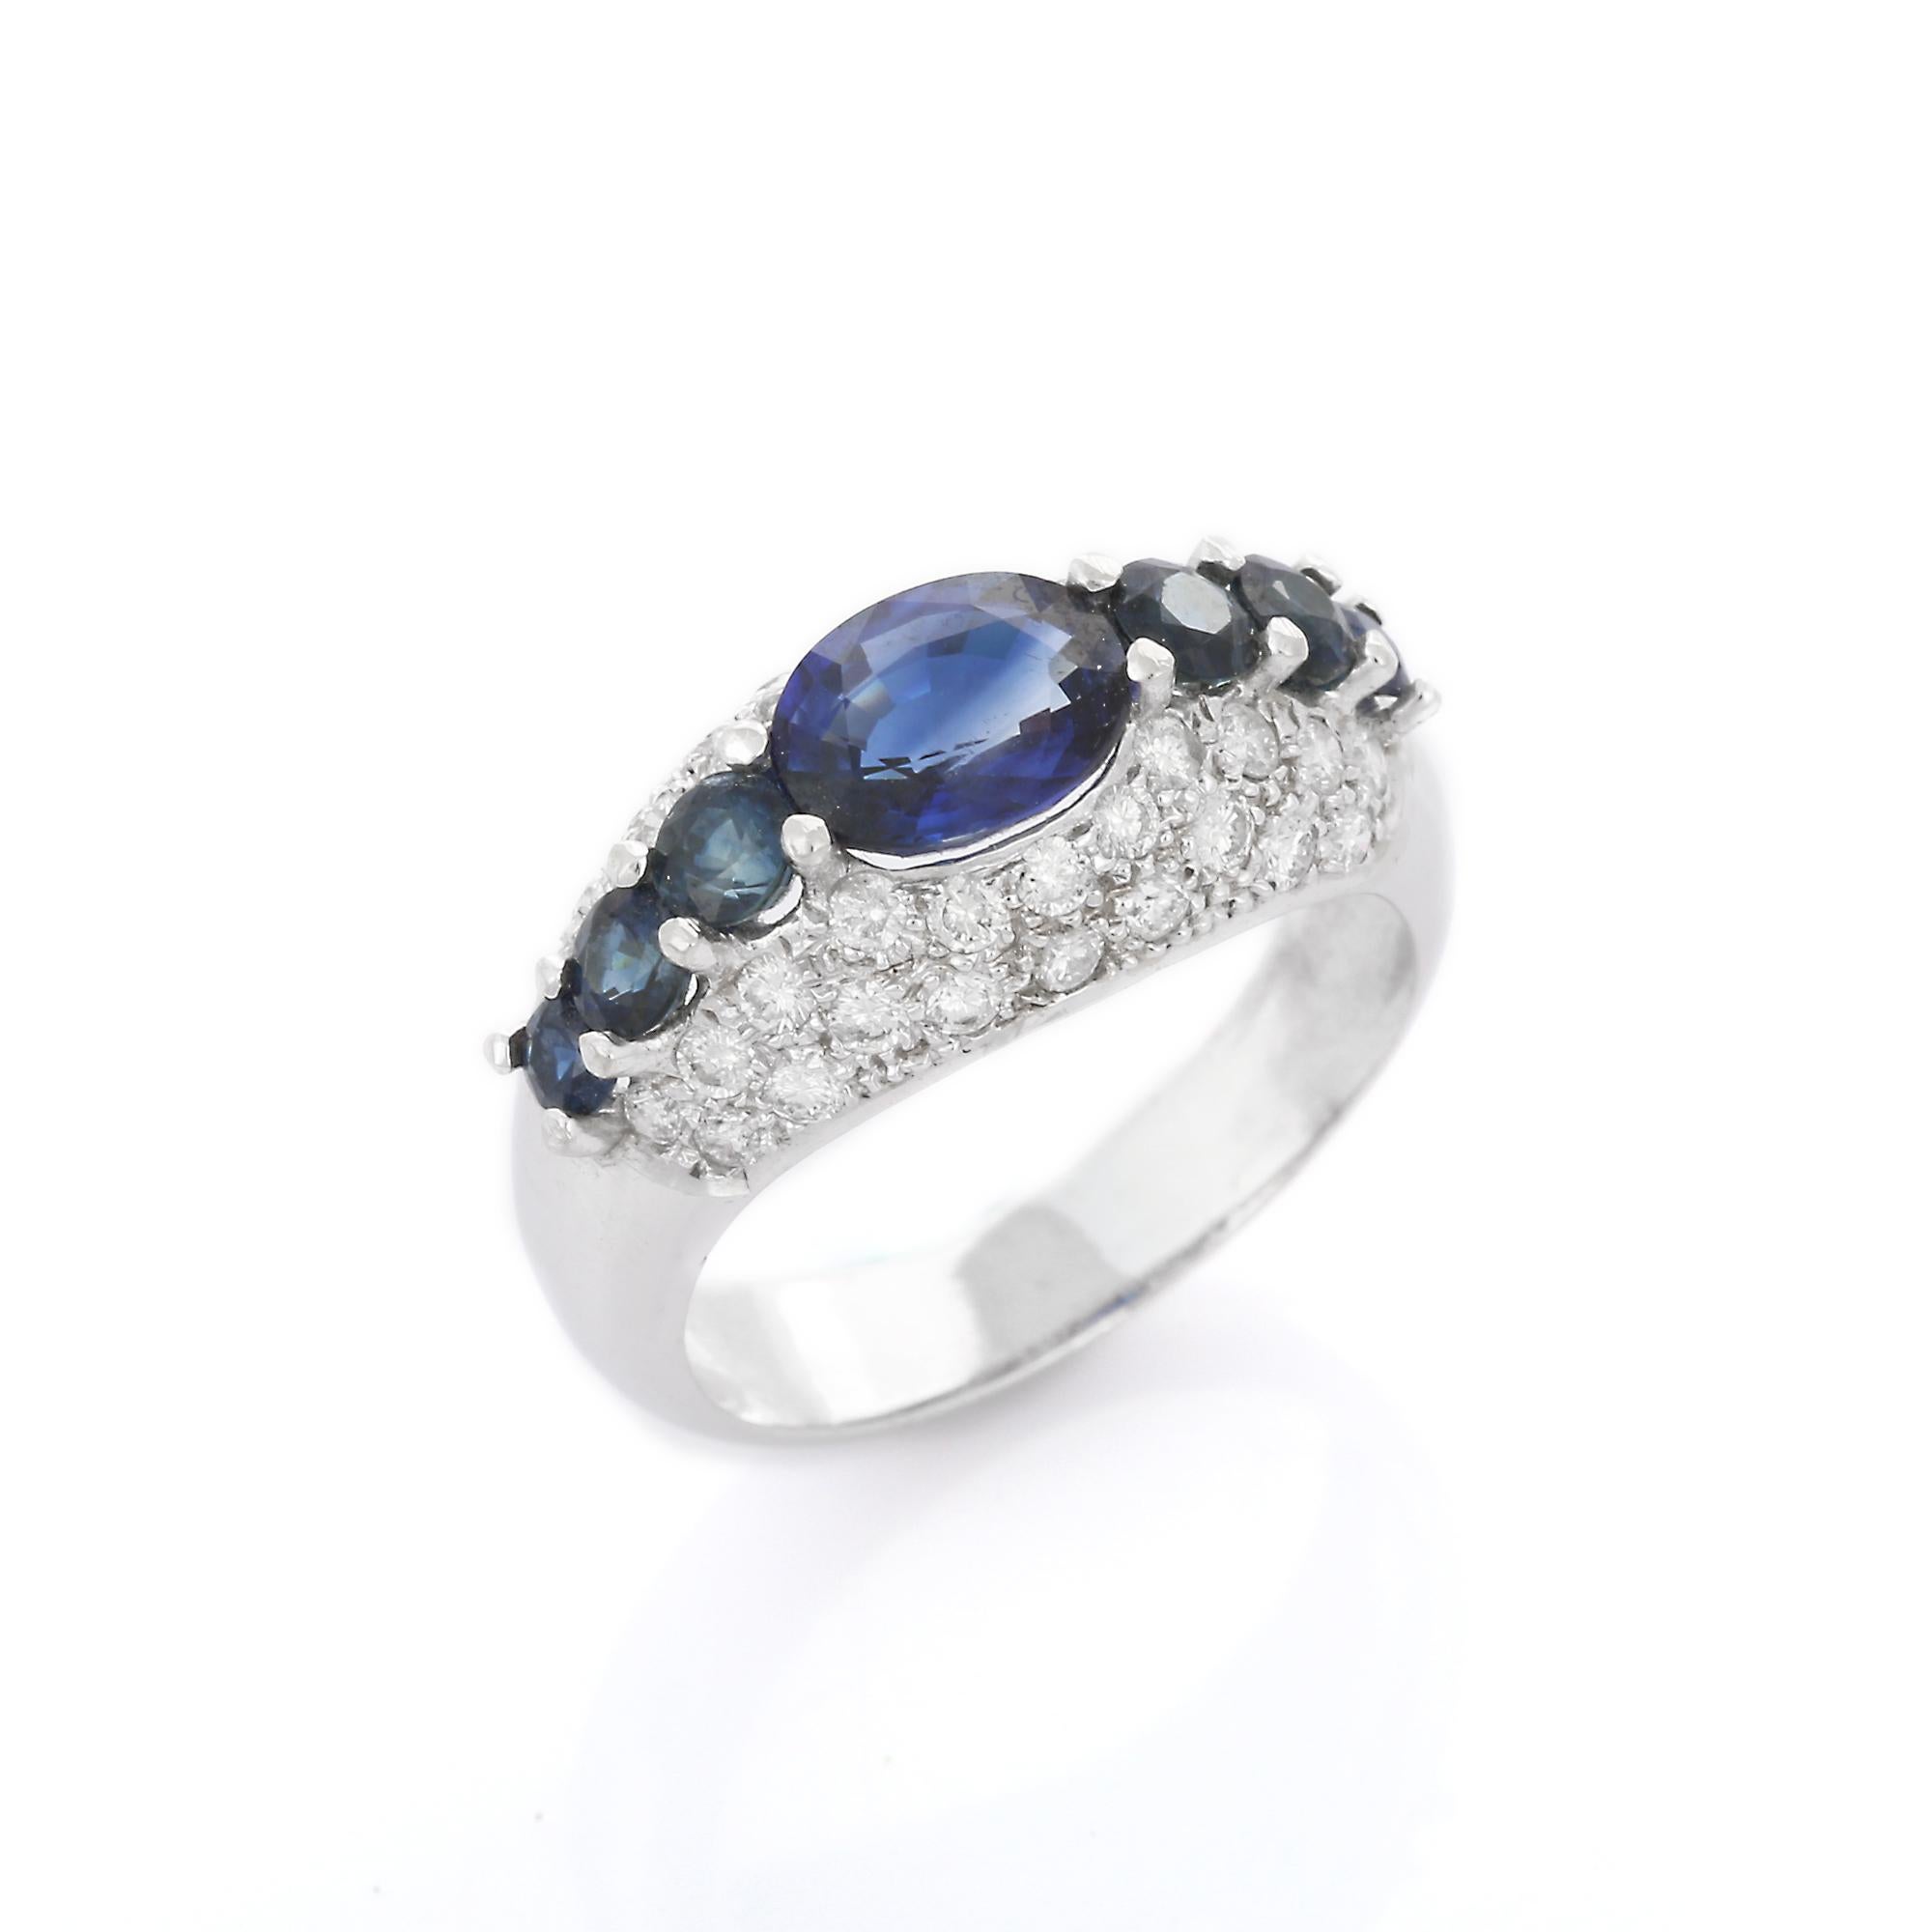 For Sale:  Blue Sapphire Engagement Ring with Diamonds in 18K White Gold 7